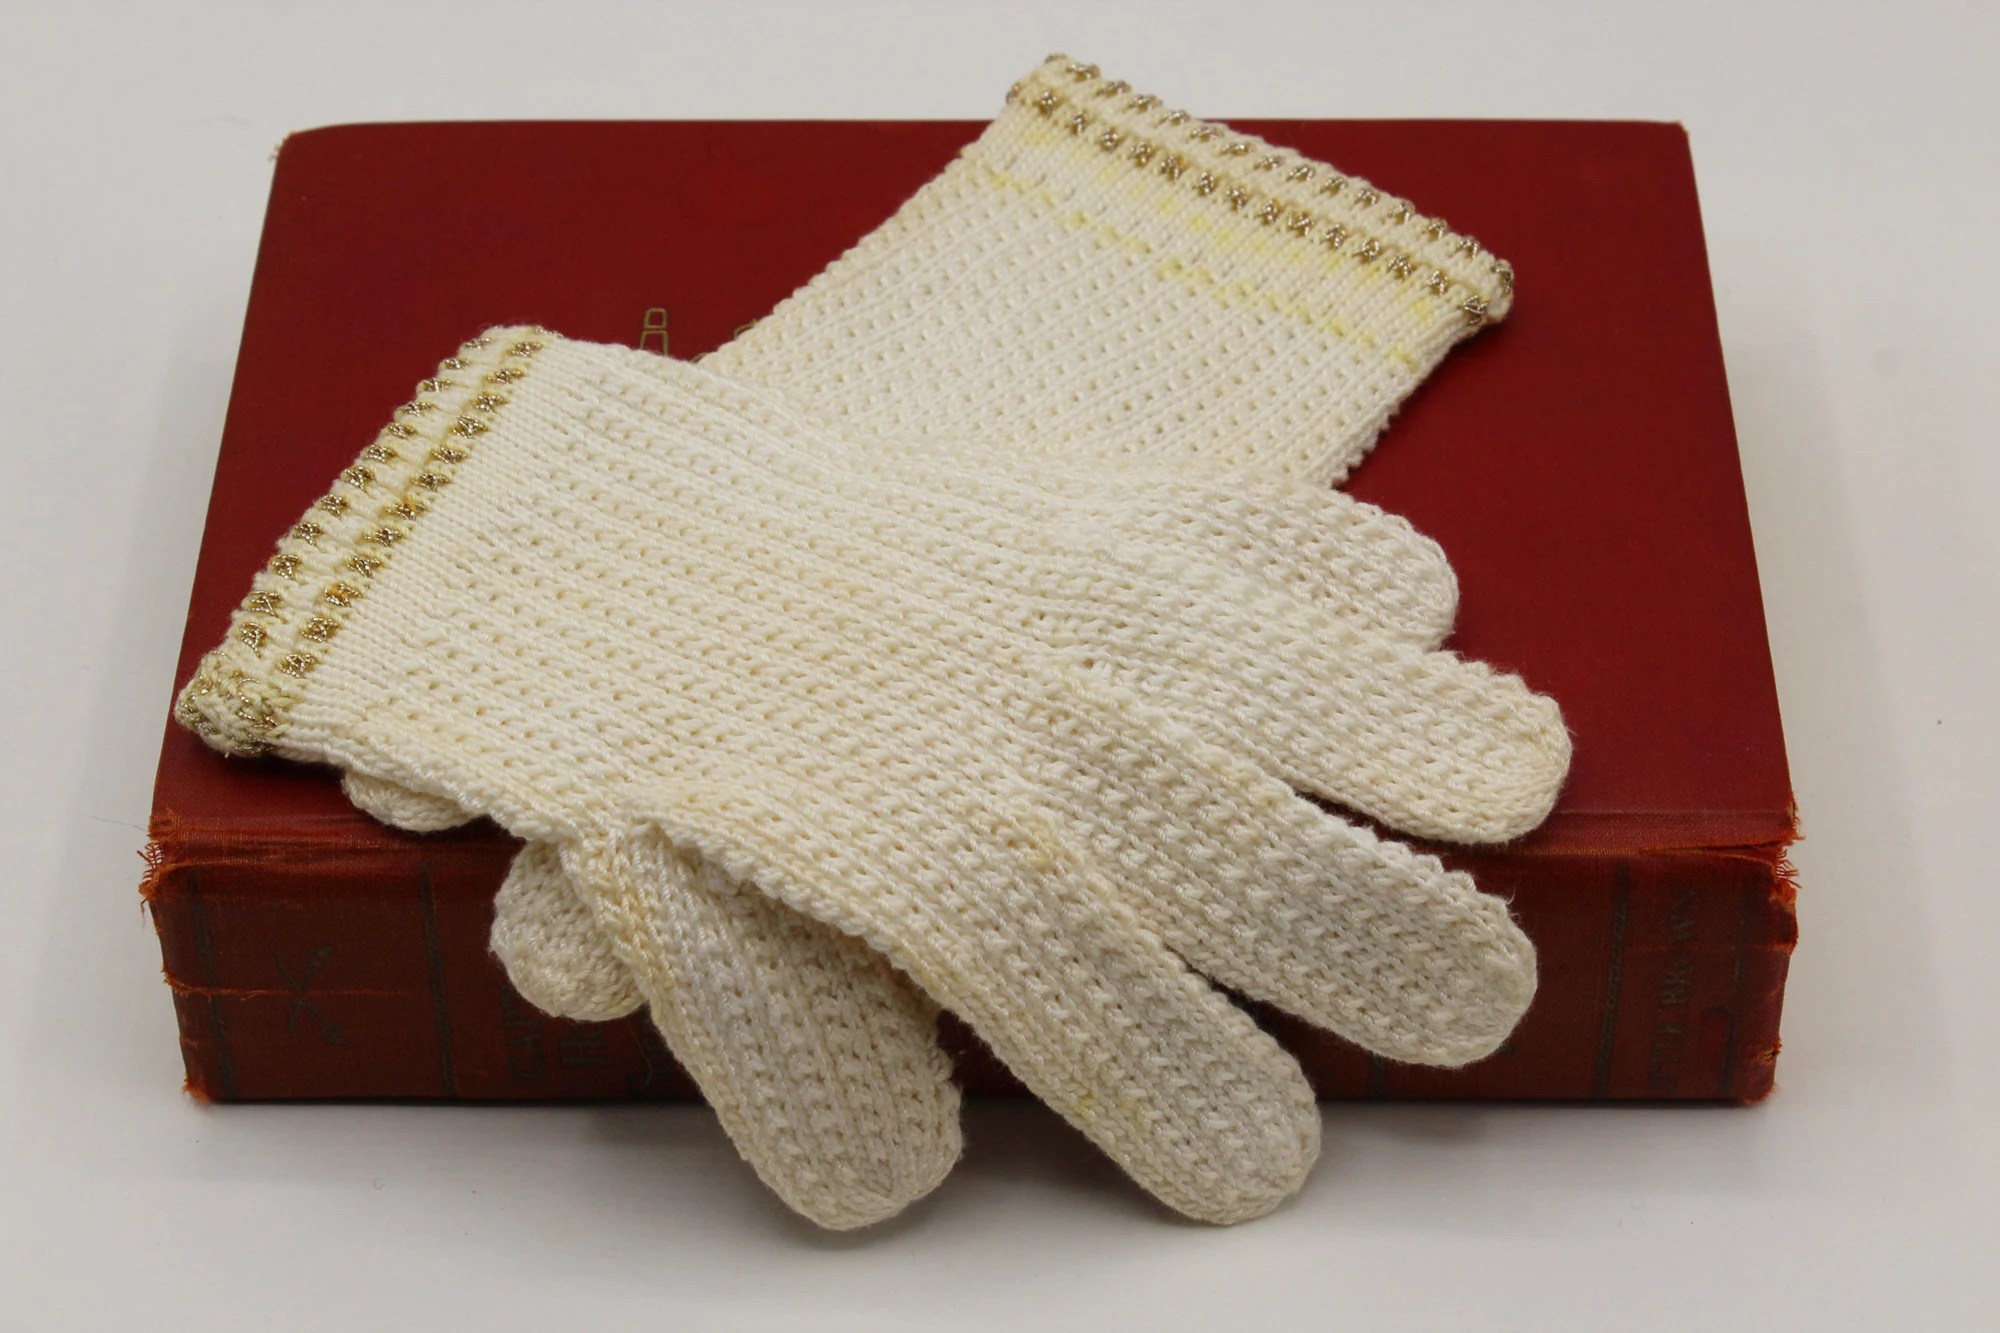 Mid Century Vintage Knit Ivory White Shorties Length MCM Short Ladies Cozy Winter Gloves with Metallic Thread Detailing - Size 7